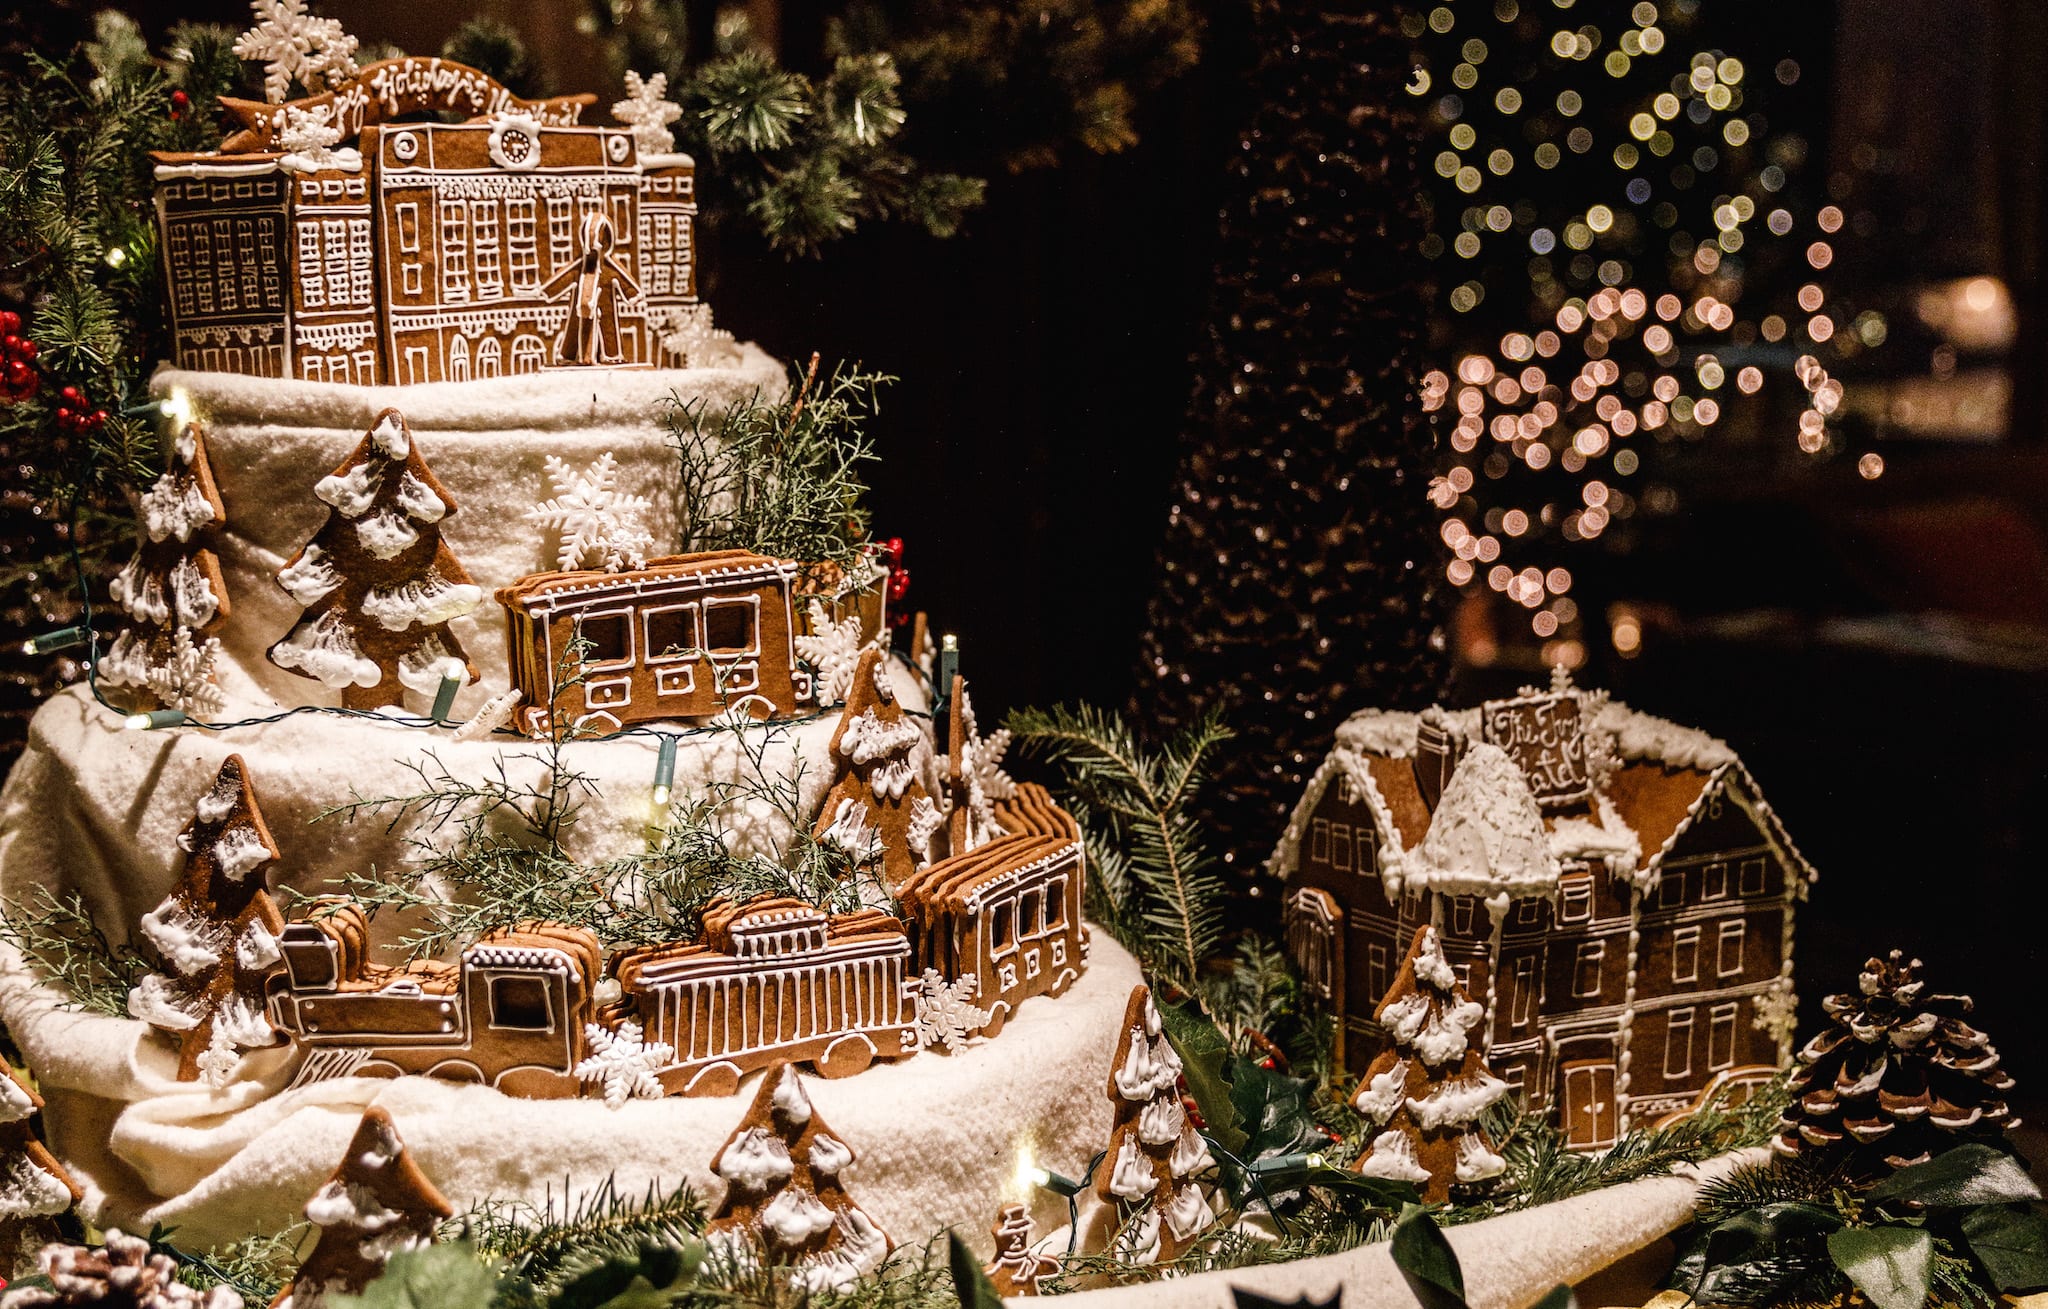 Gingerbread display of Baltimore's Penn Station and The Ivy Hotel on a table.